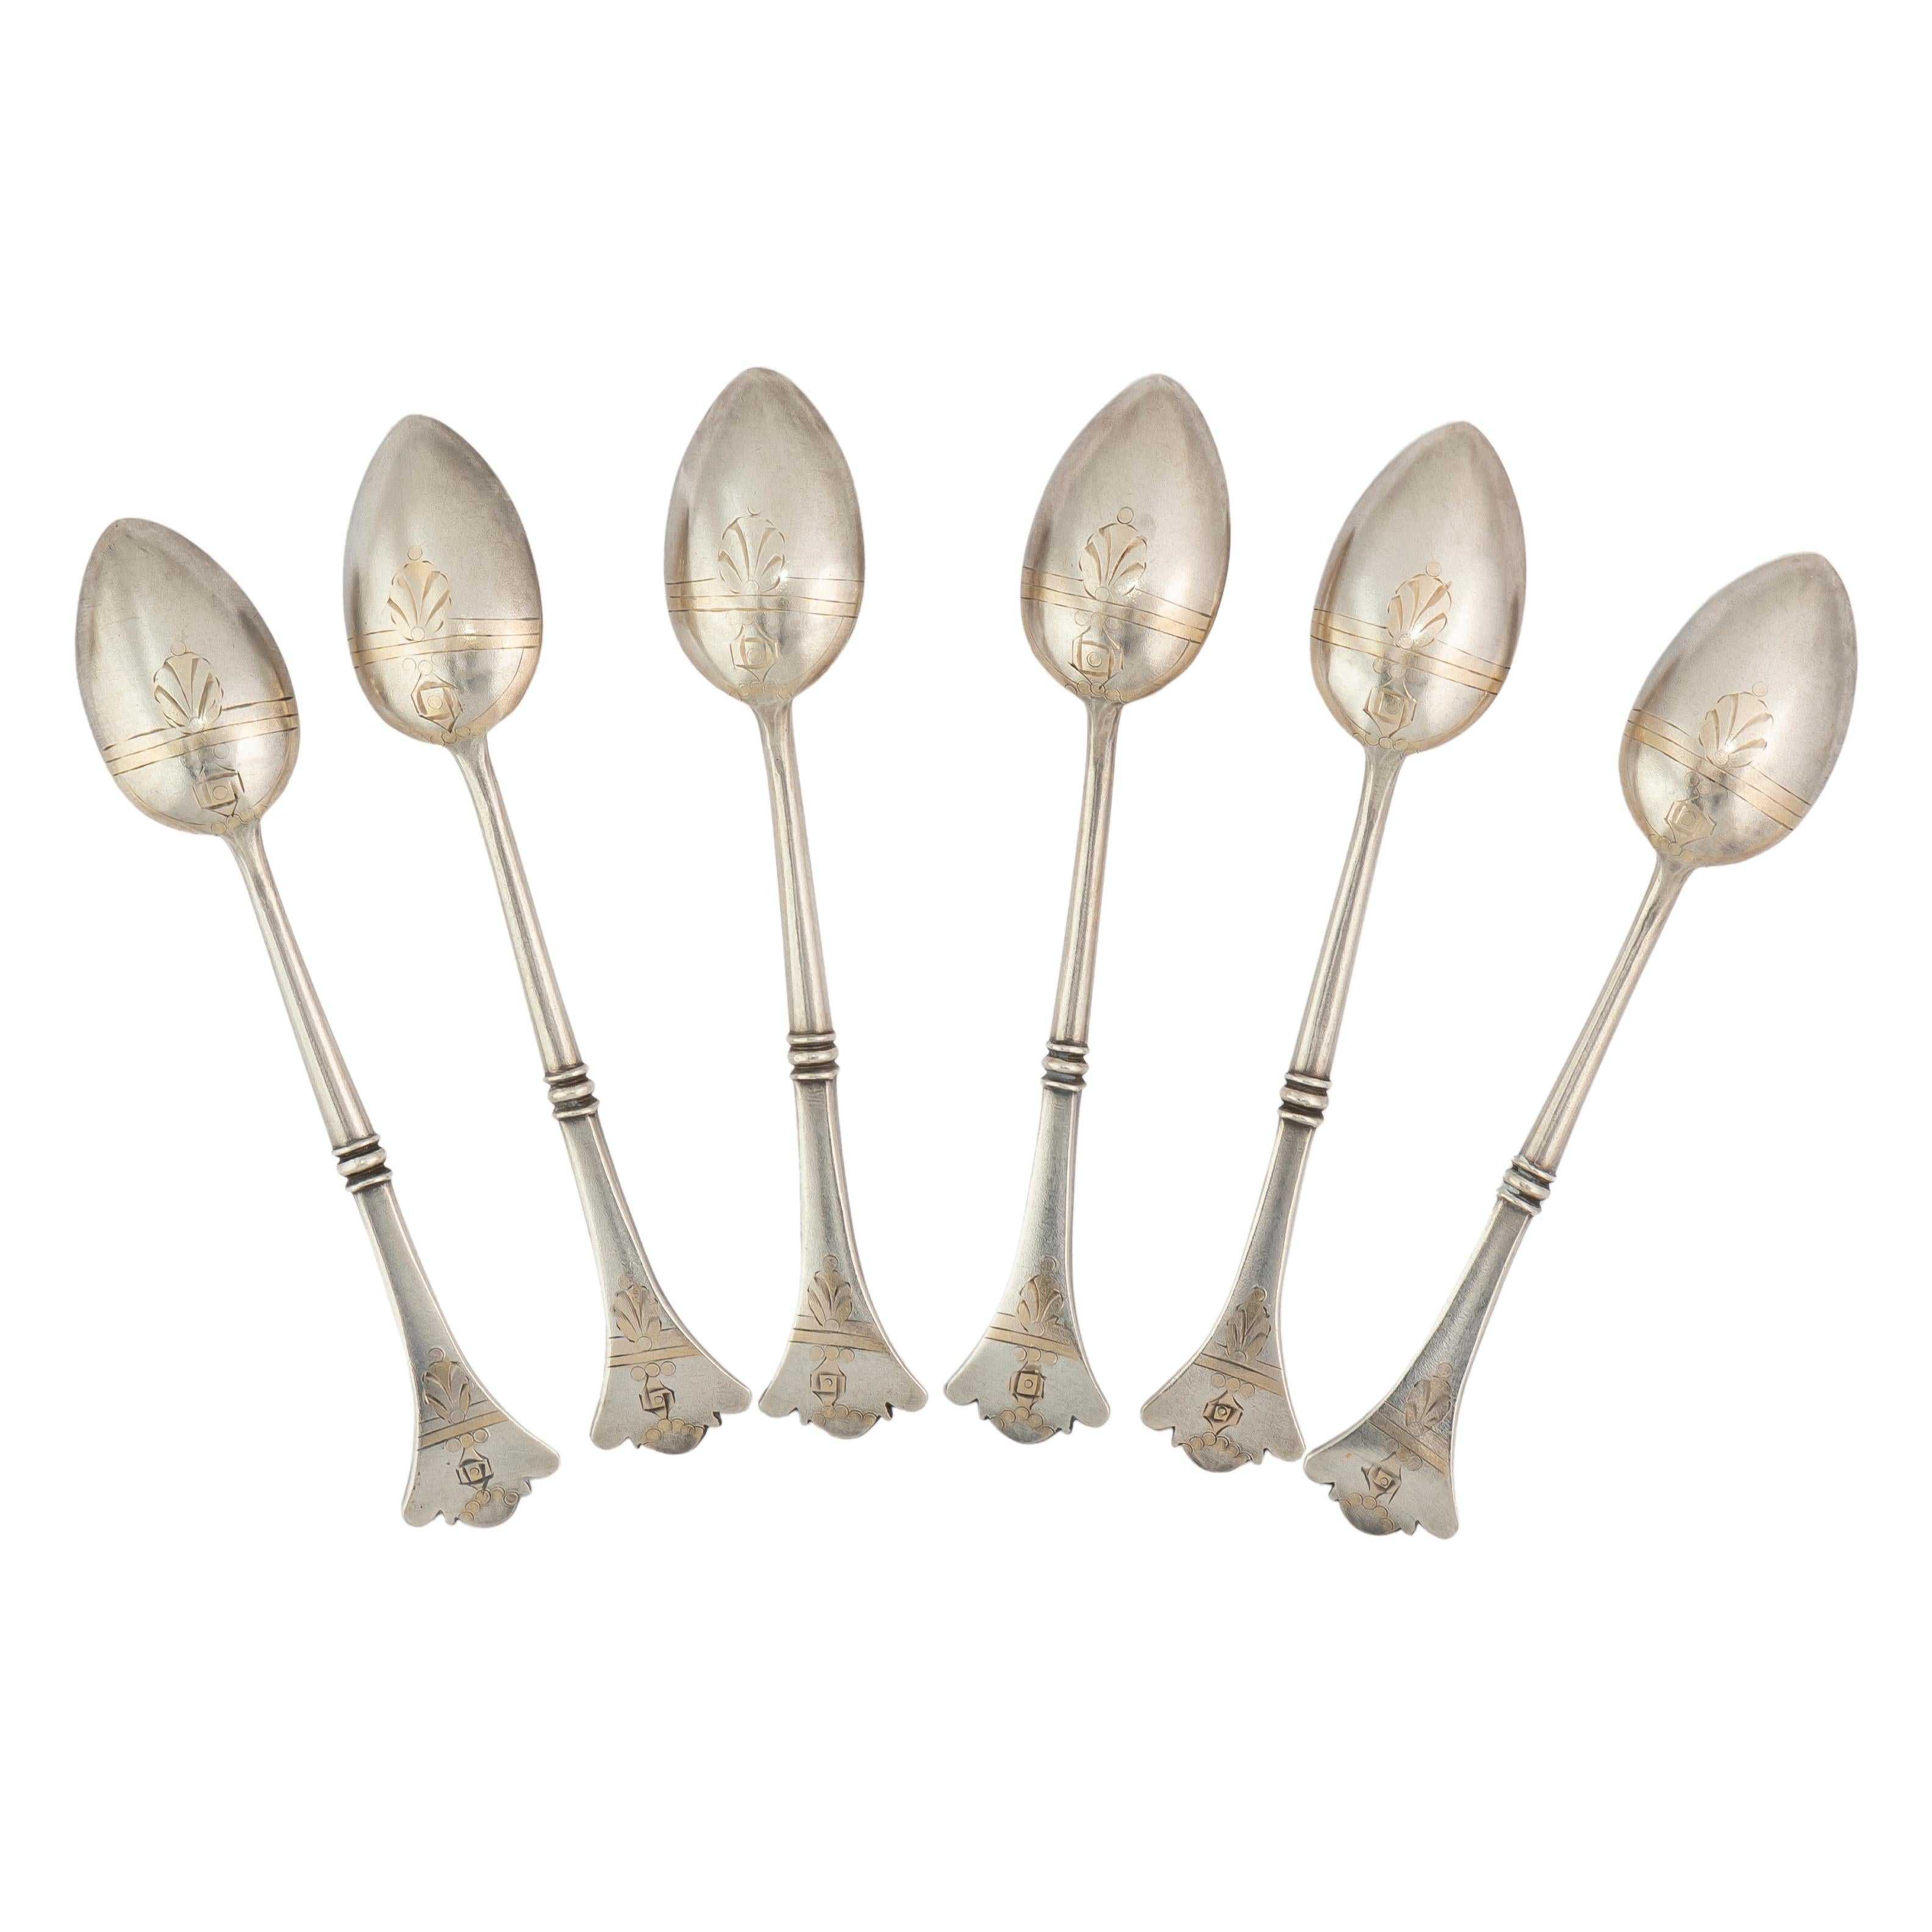 Set of six elegant solid silver Russian demi-tasse spoons from the ancient capital of Moscow, with flared and slightly curved handles, engraved exterior bowls and gilded interiors typical of the period. The gilding is original. Exterior of bowls and